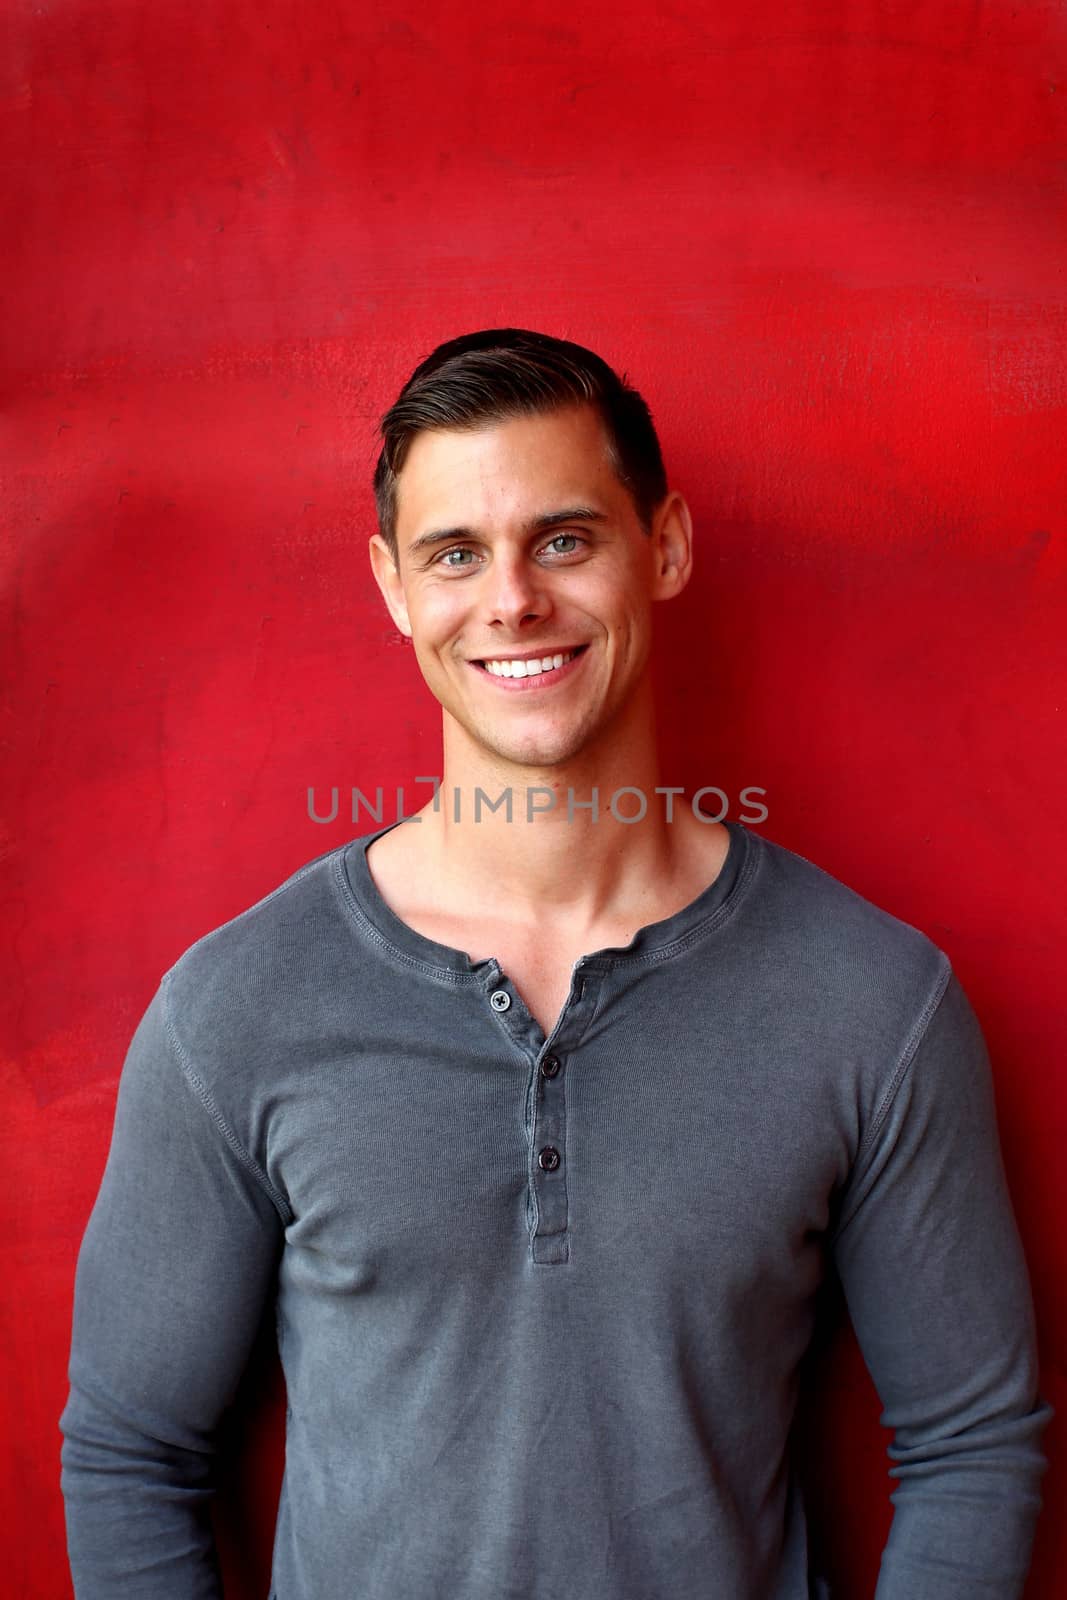 Portrait of a man with gray shirt in front red wall.